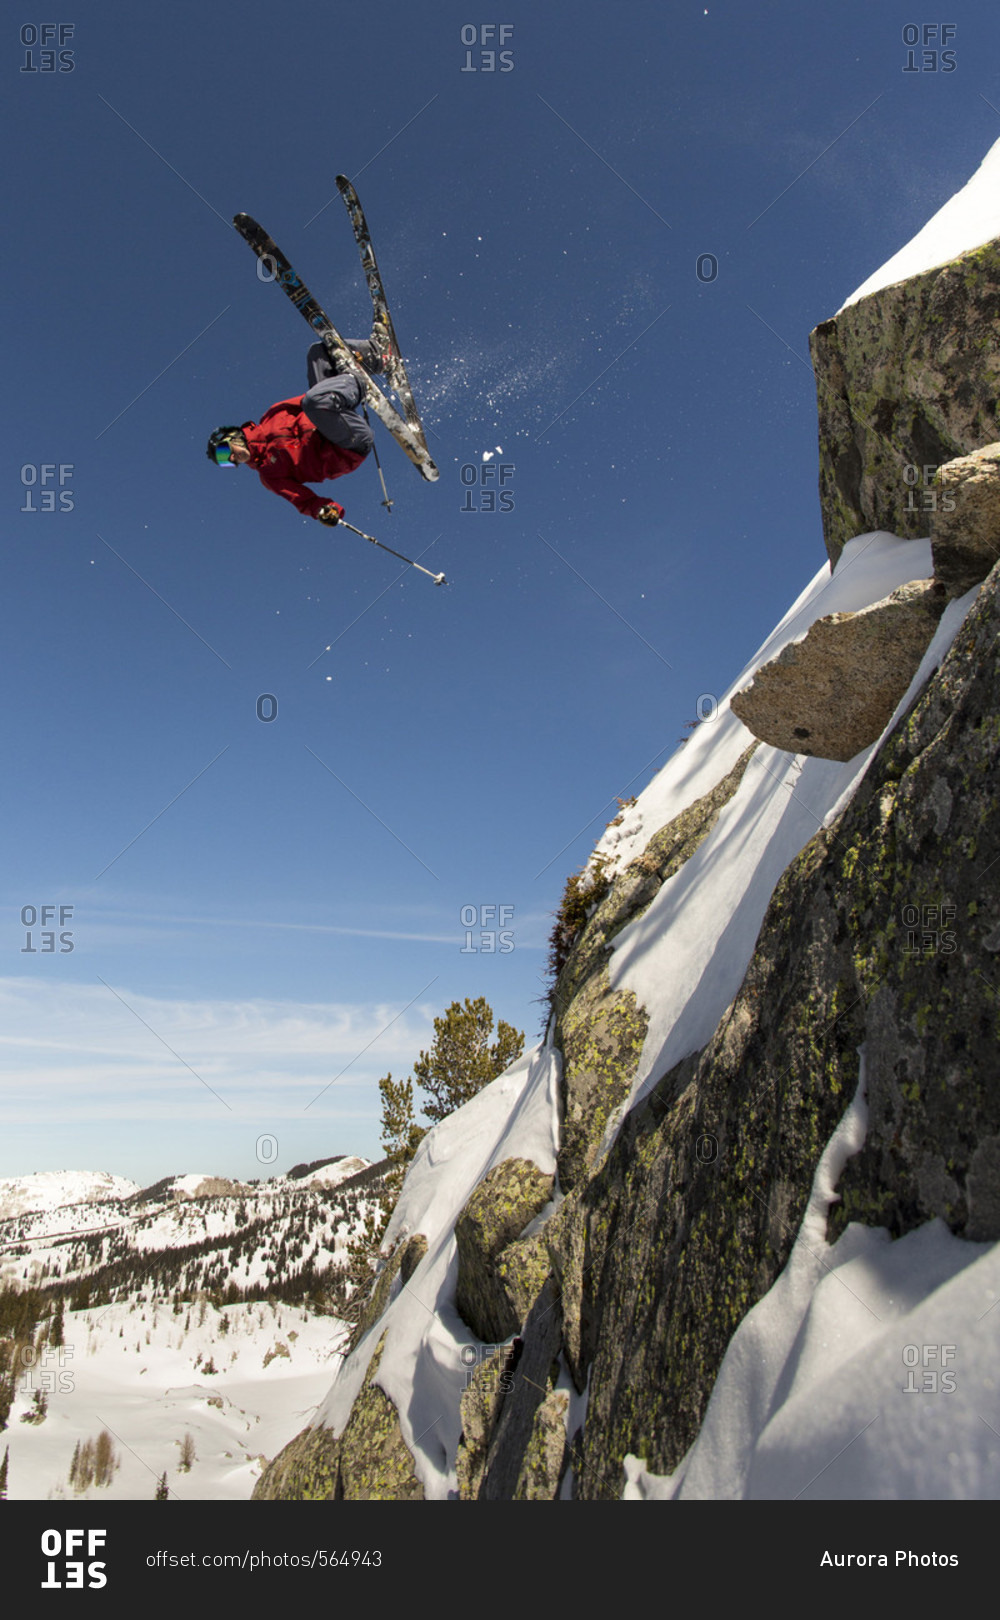 Extreme skier doing upside down stunt jump from cliff